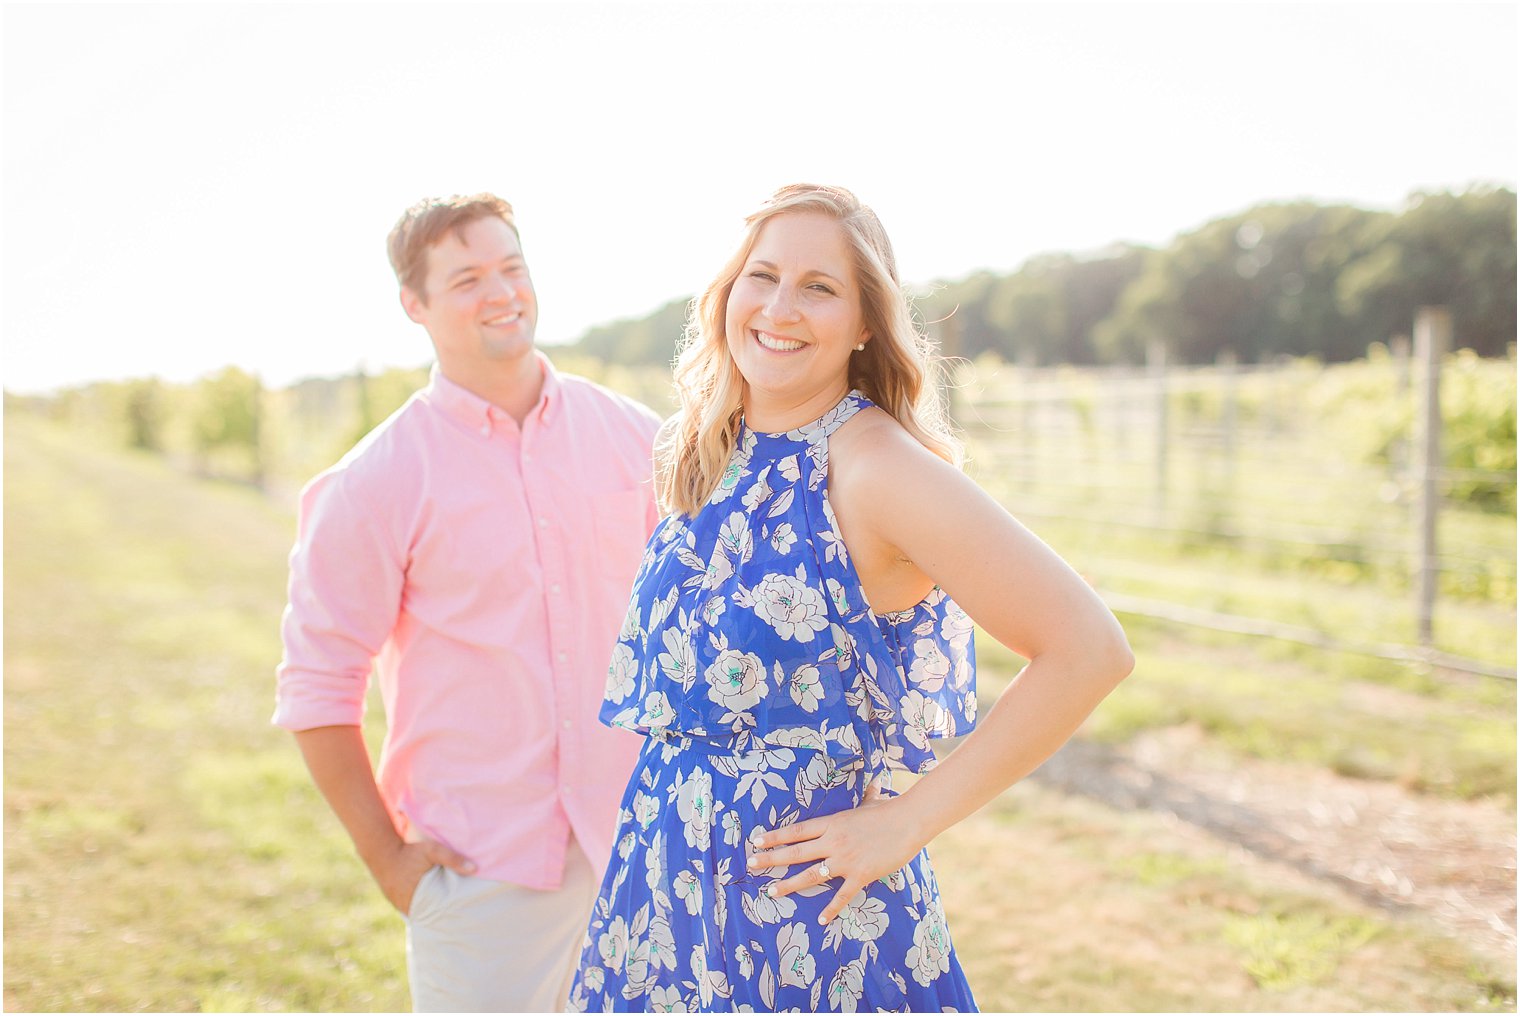 Playful smile from bride during Laurita Winery engagement session with Idalia Photography